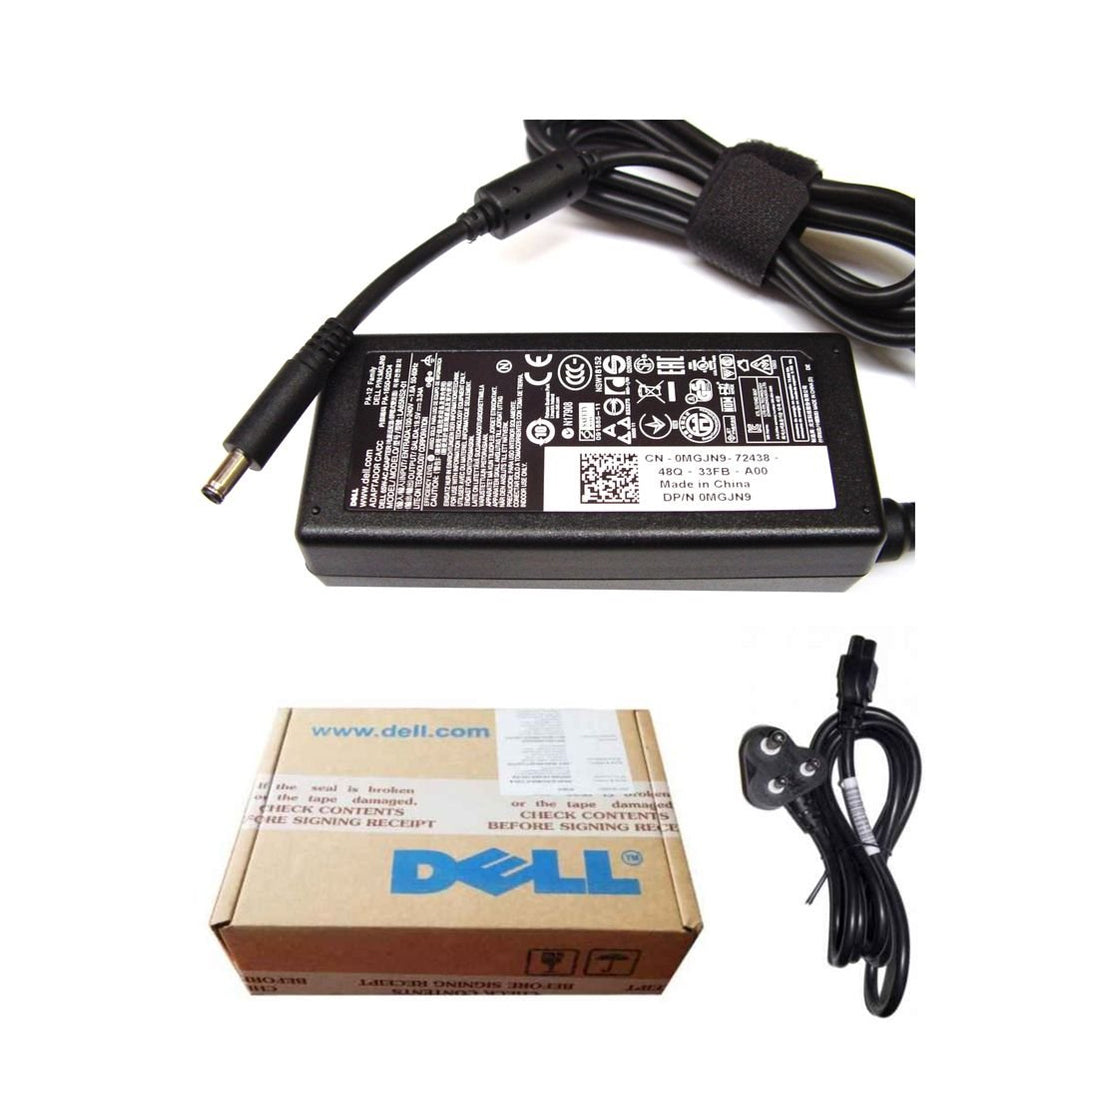 Dell Original 65W 19.5V 4.5mm Pin Laptop Charger Adapter for XPS 12 9Q33 With Power Cord